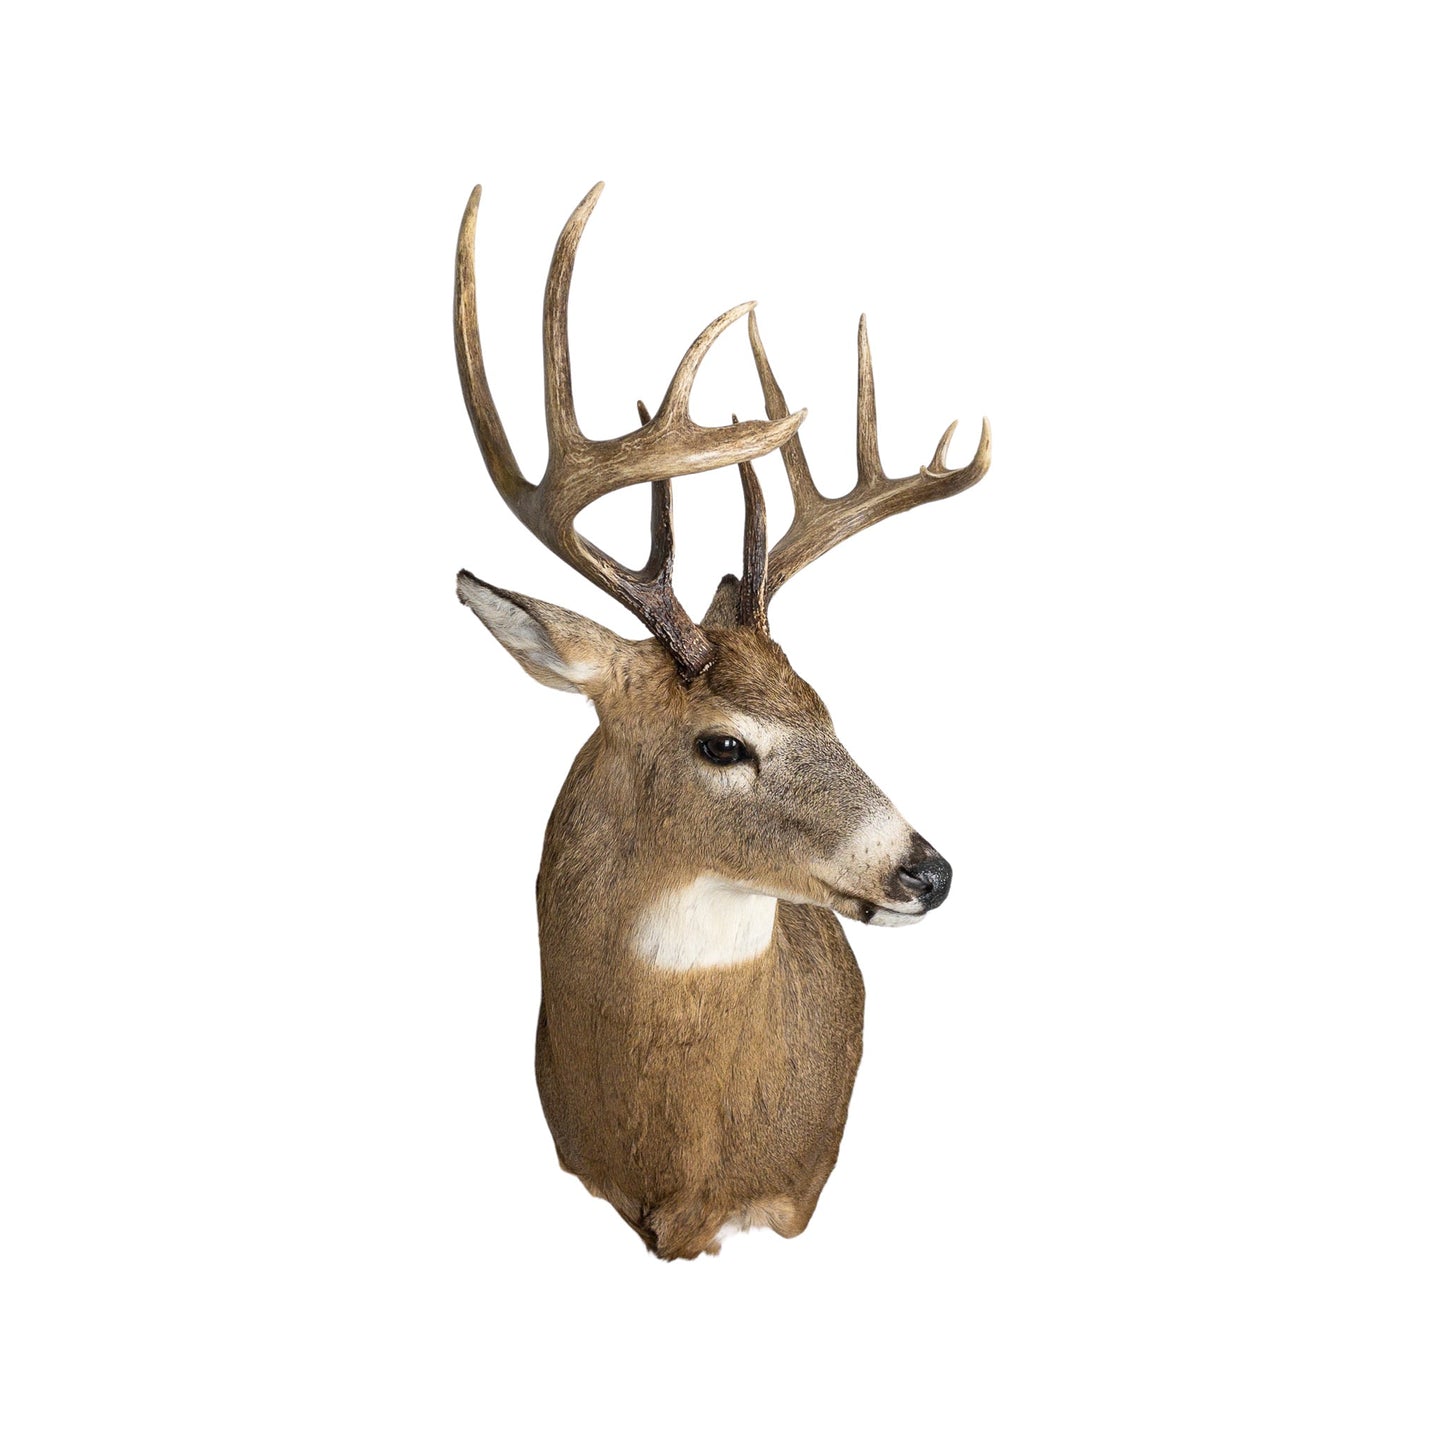 A Home Decor Taxidermy White-Tailed Deer Shoulder Mount of Grade Remarkable